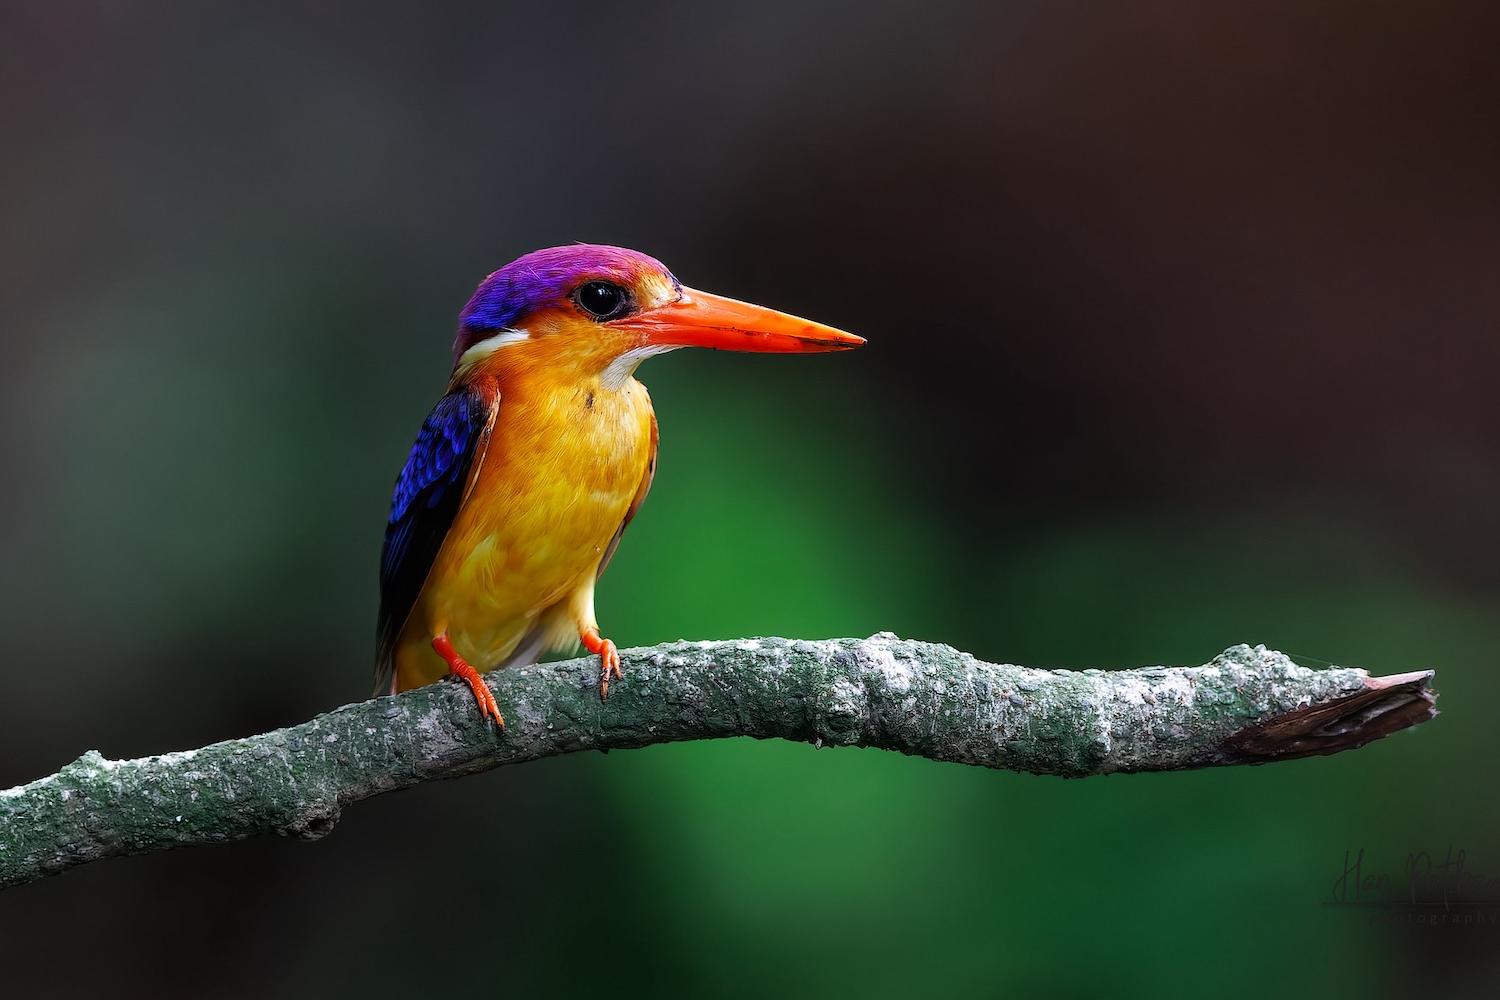 brightly colored kingfisher bird on a branch in a forest in Maharashtra India - paying Indian farmers to conserve forests